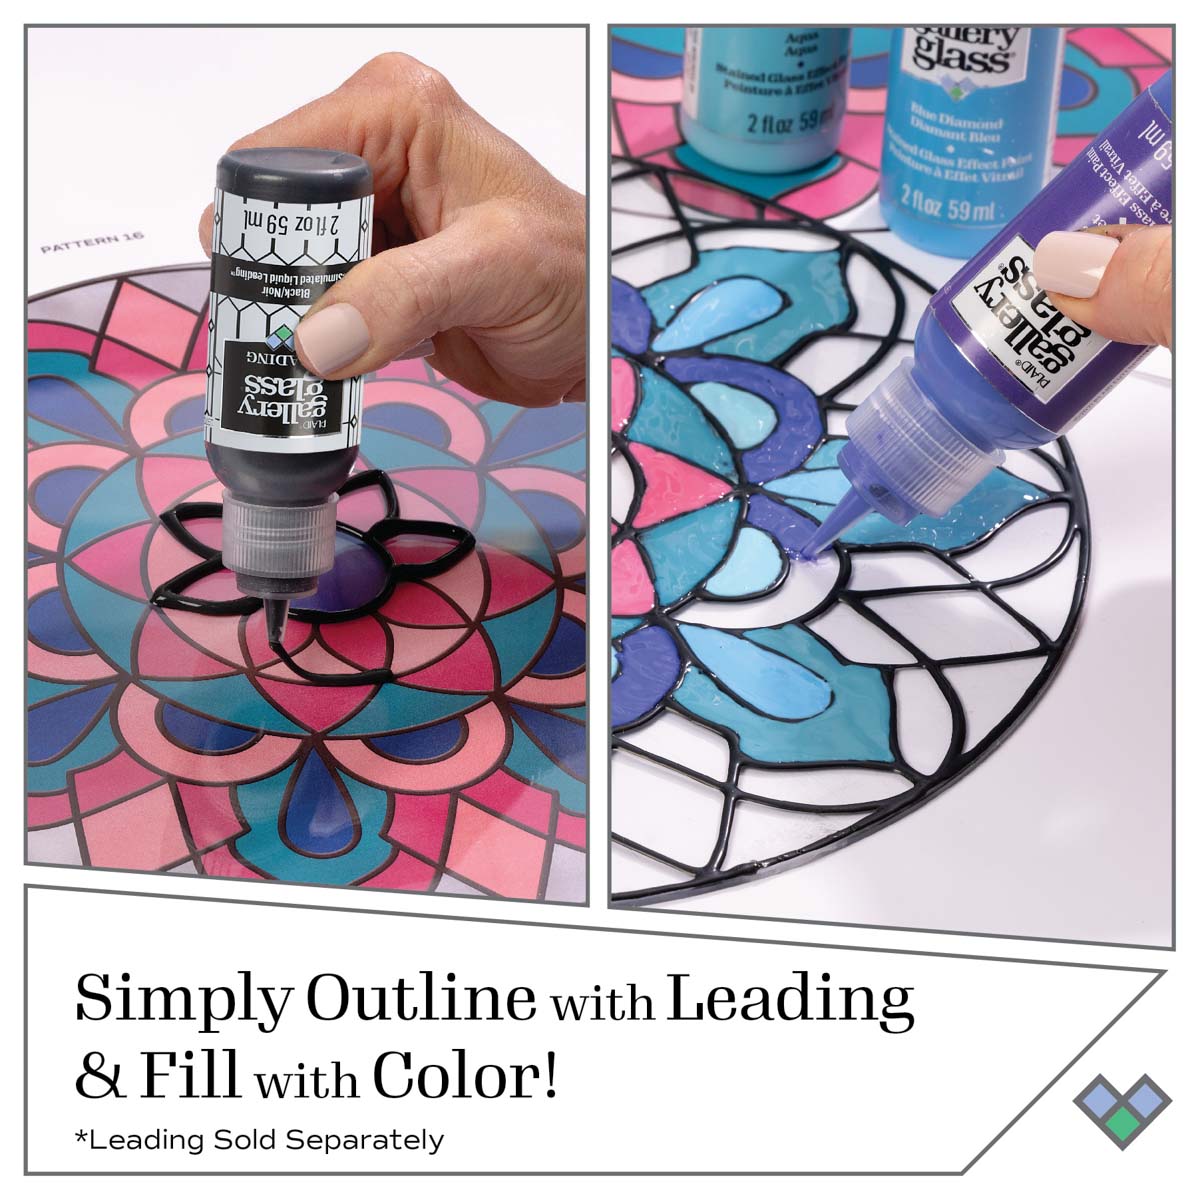 Gallery Glass ® Stained Glass Effect Paint - Deep Blue, 2 oz. - 20042